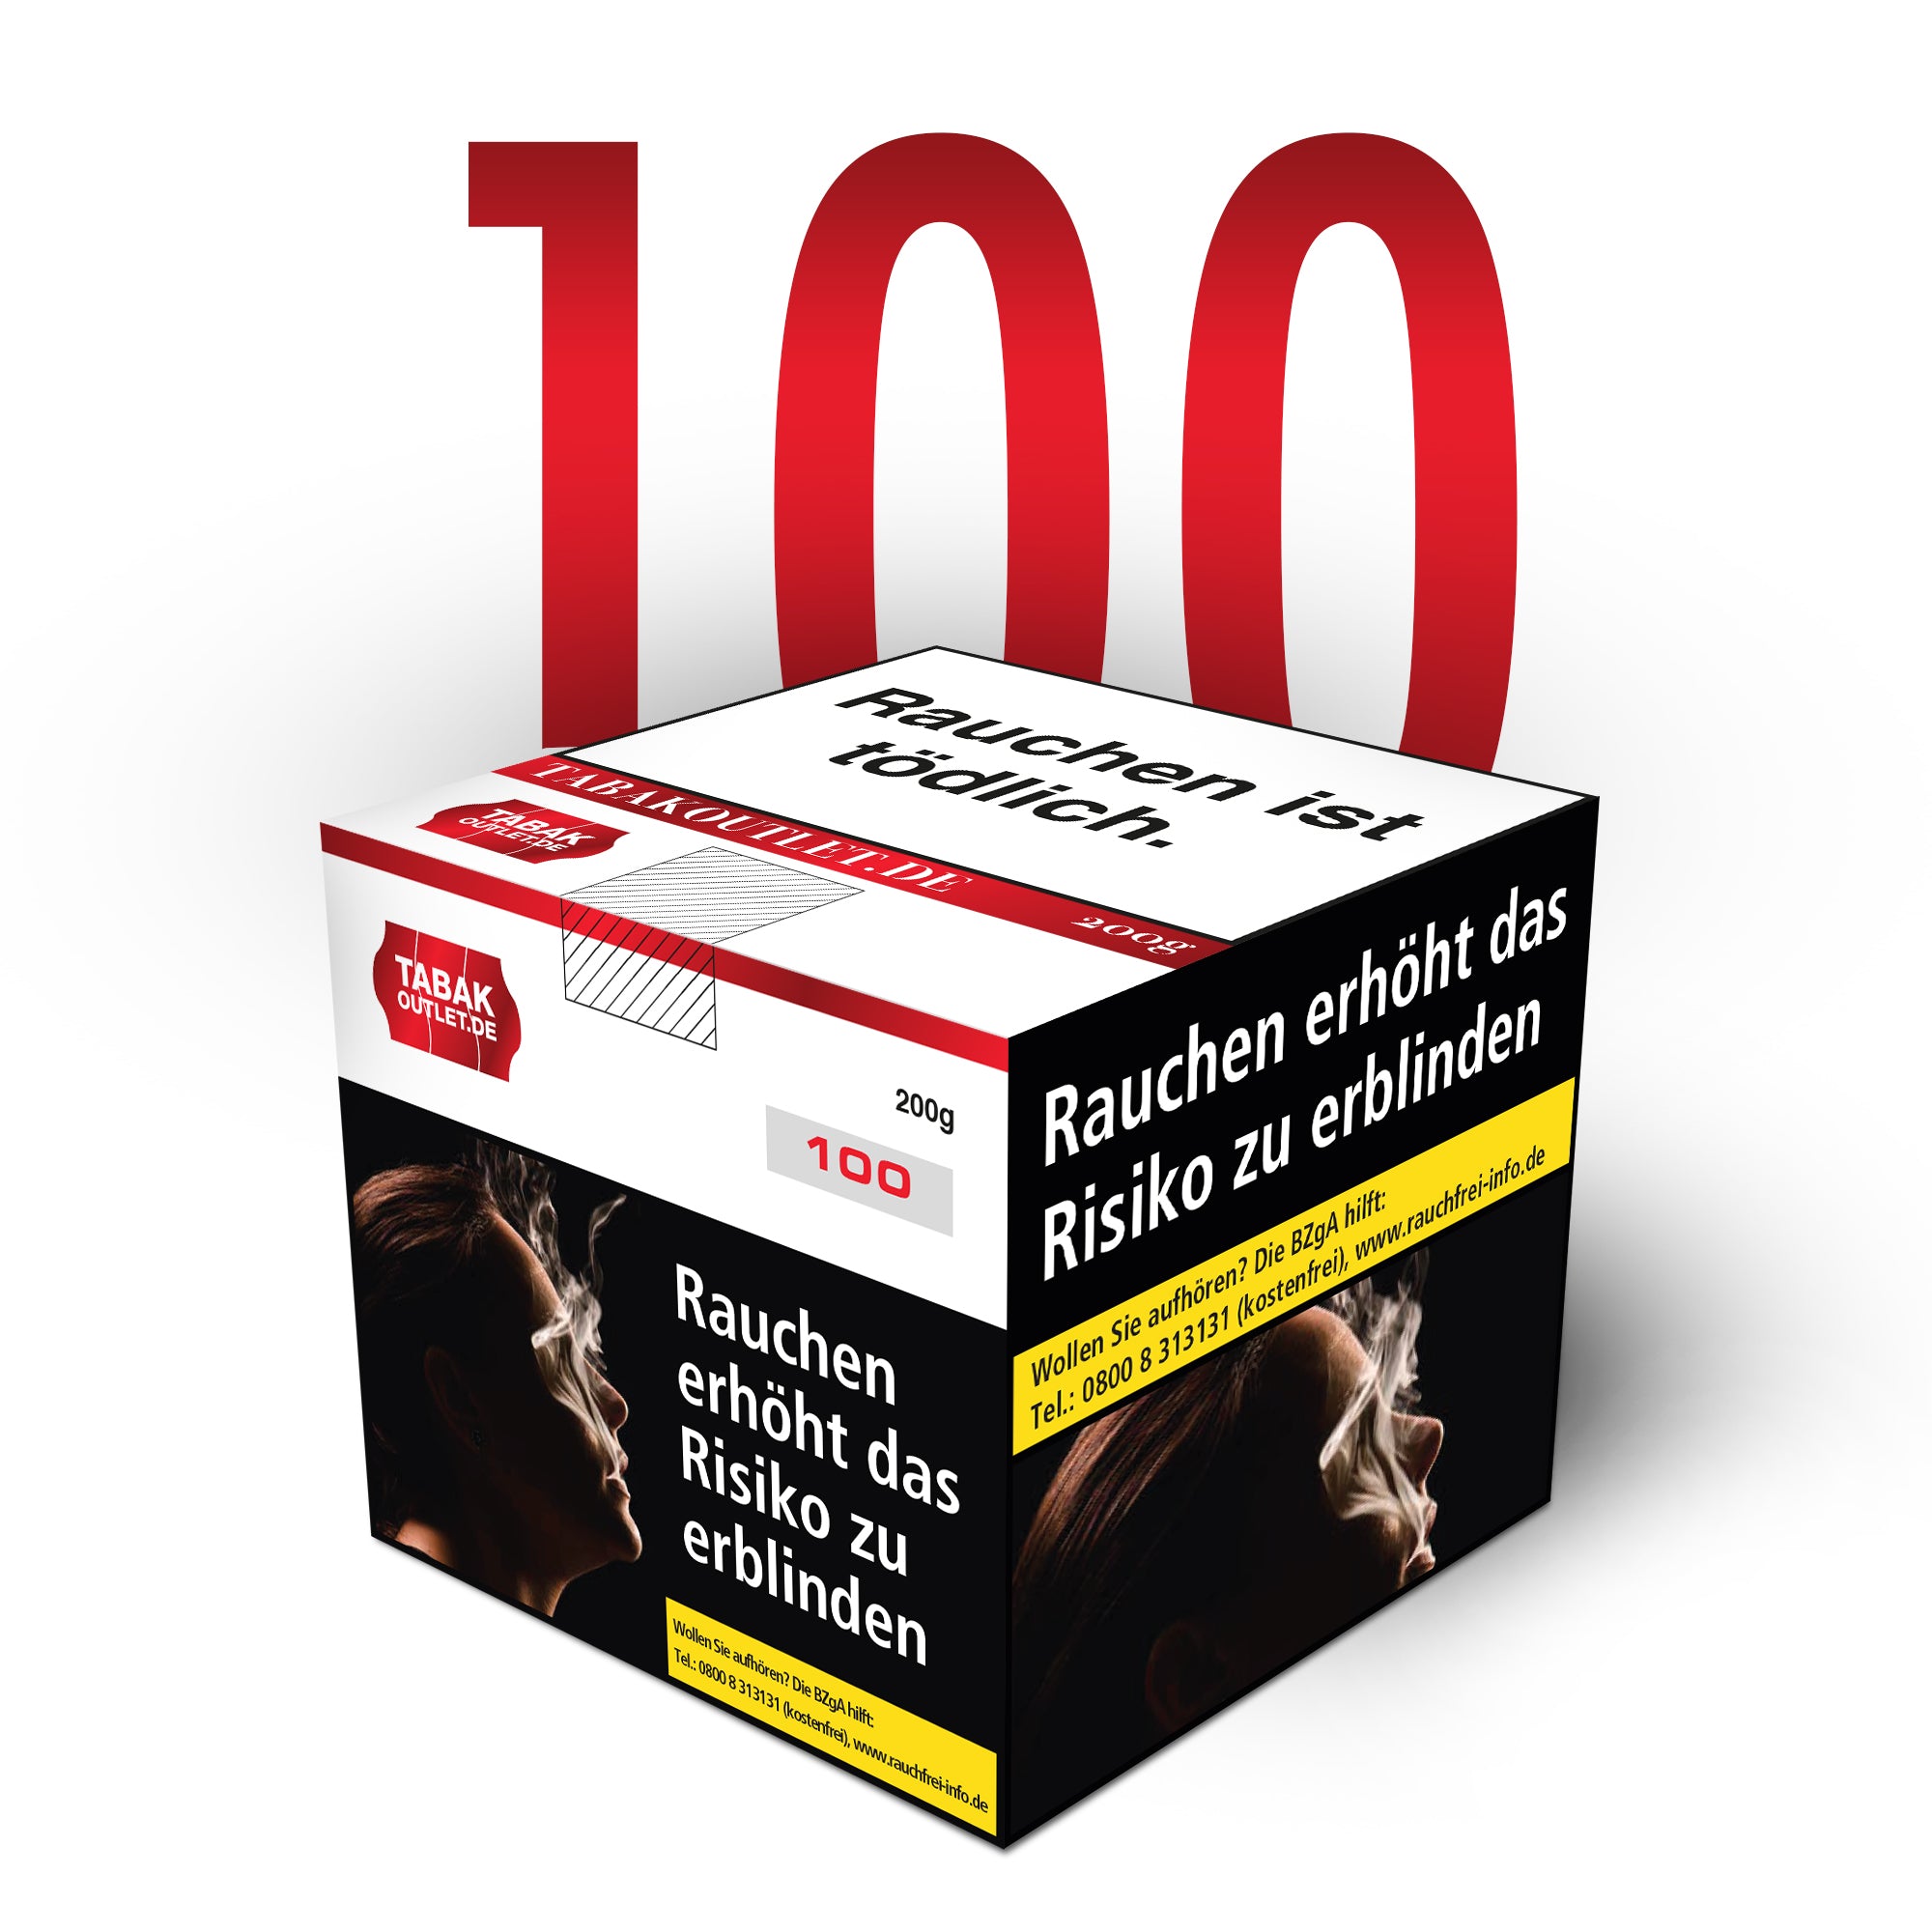 100 Apfel, Pfirsich - Tabakoutlet